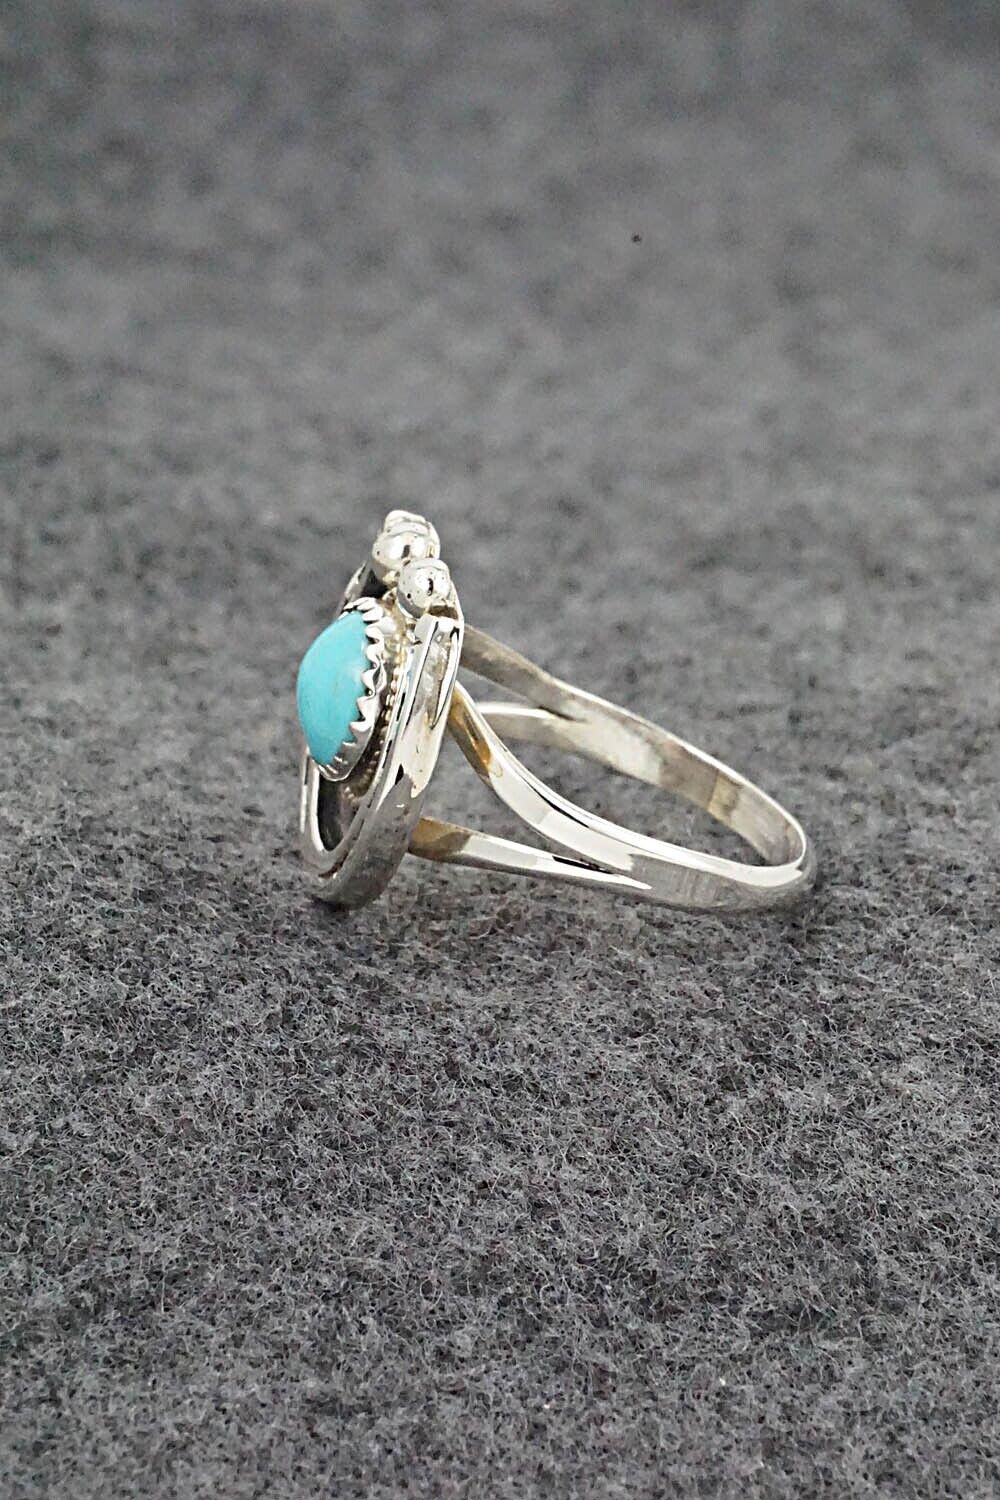 Turquoise & Sterling Silver Ring - Alice Rose Saunders - Size 9.25